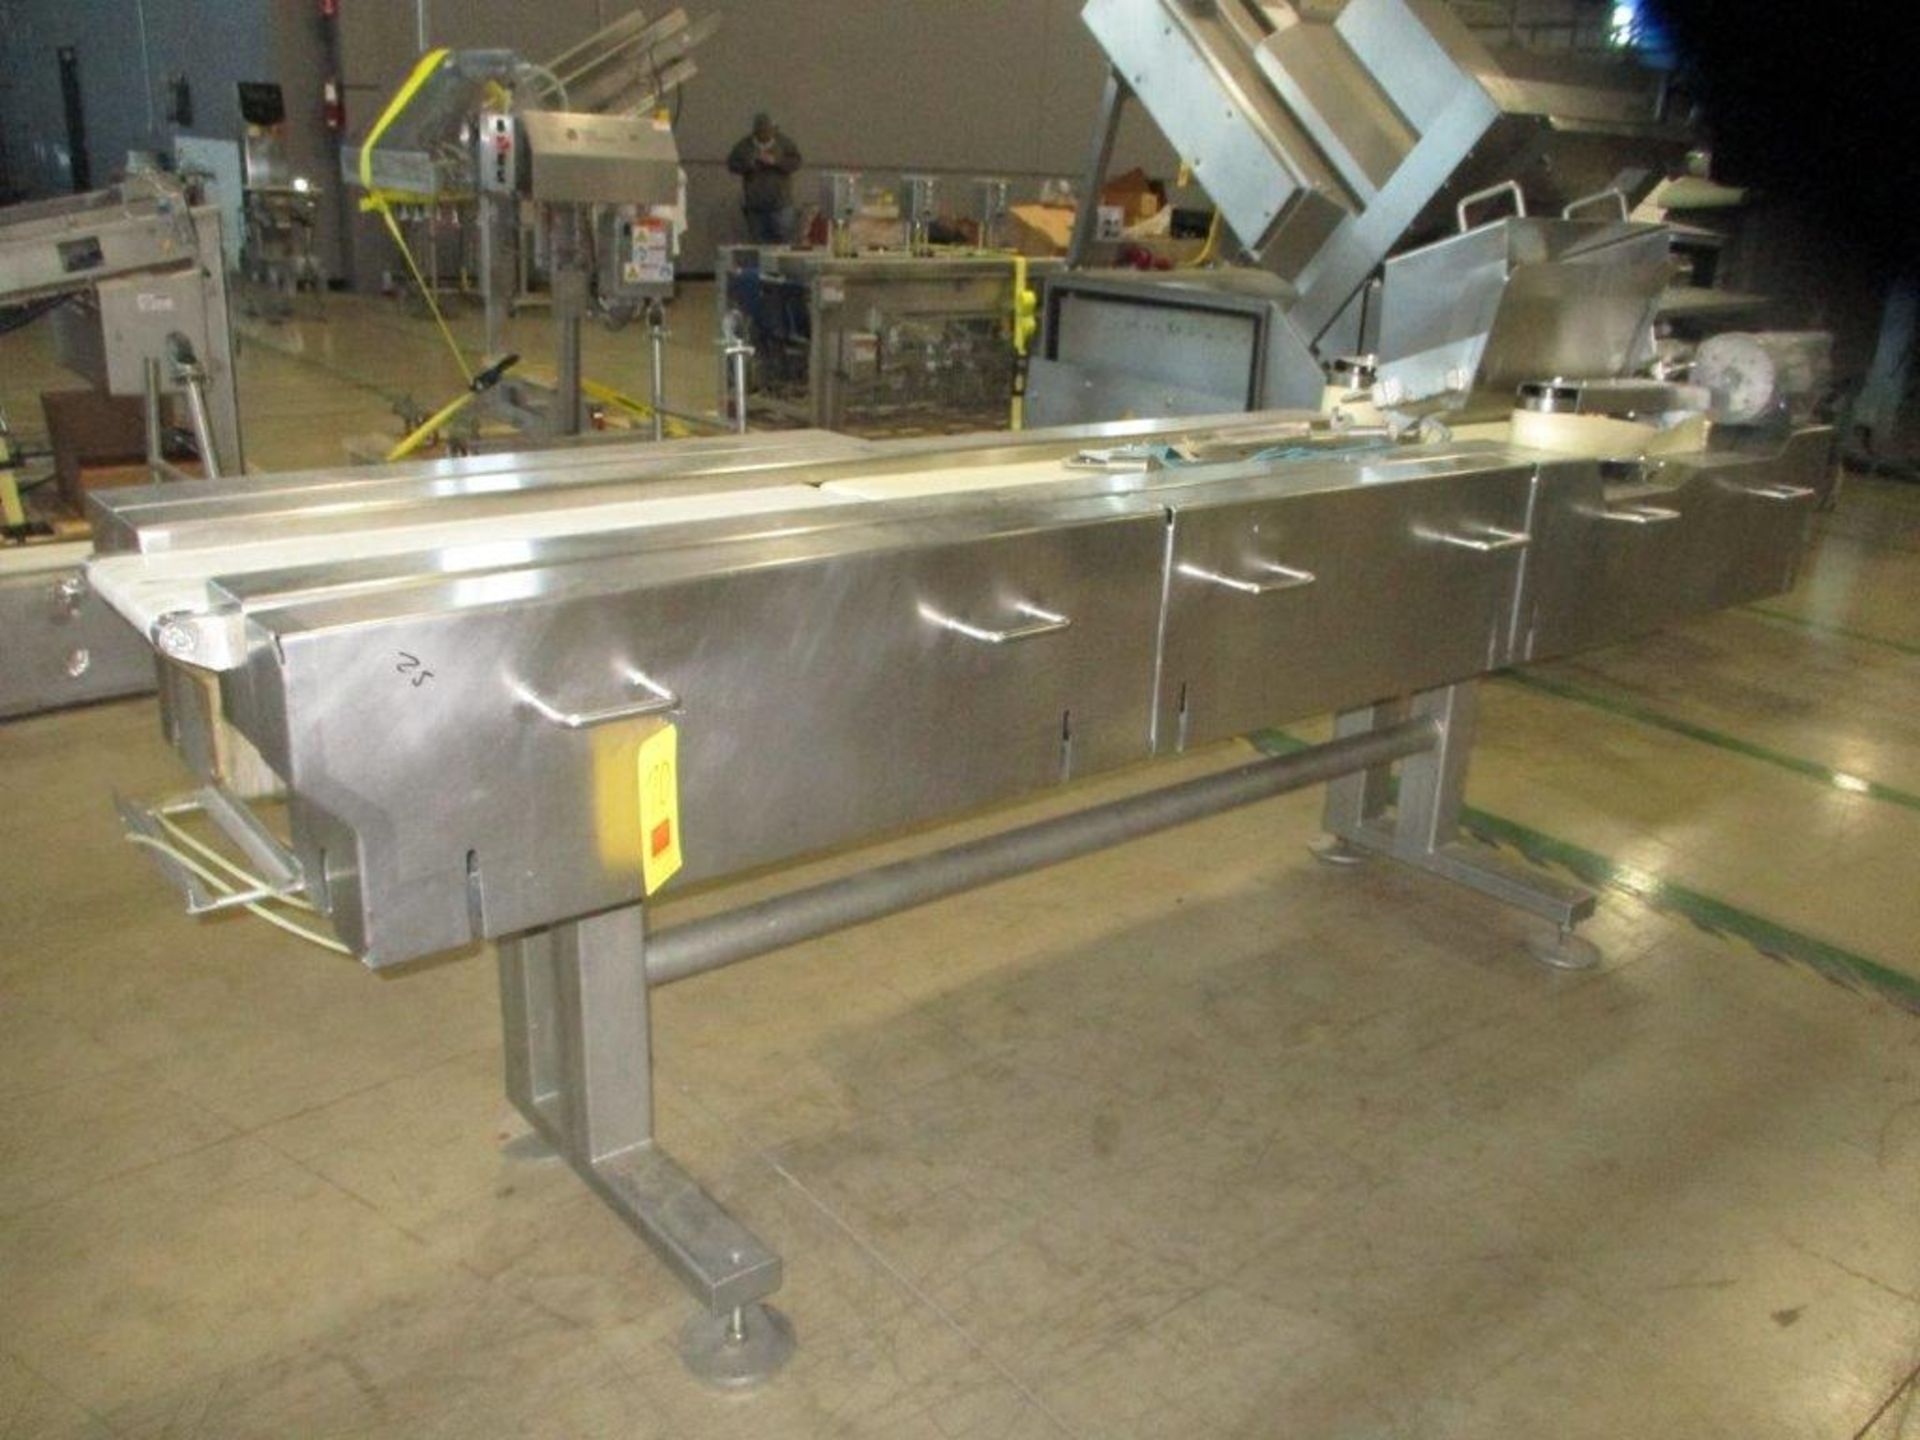 S/S Transfer Conveyor with Side Belts 11" Width x 10'6" Length - Riggers Fee: $350 - Image 2 of 2